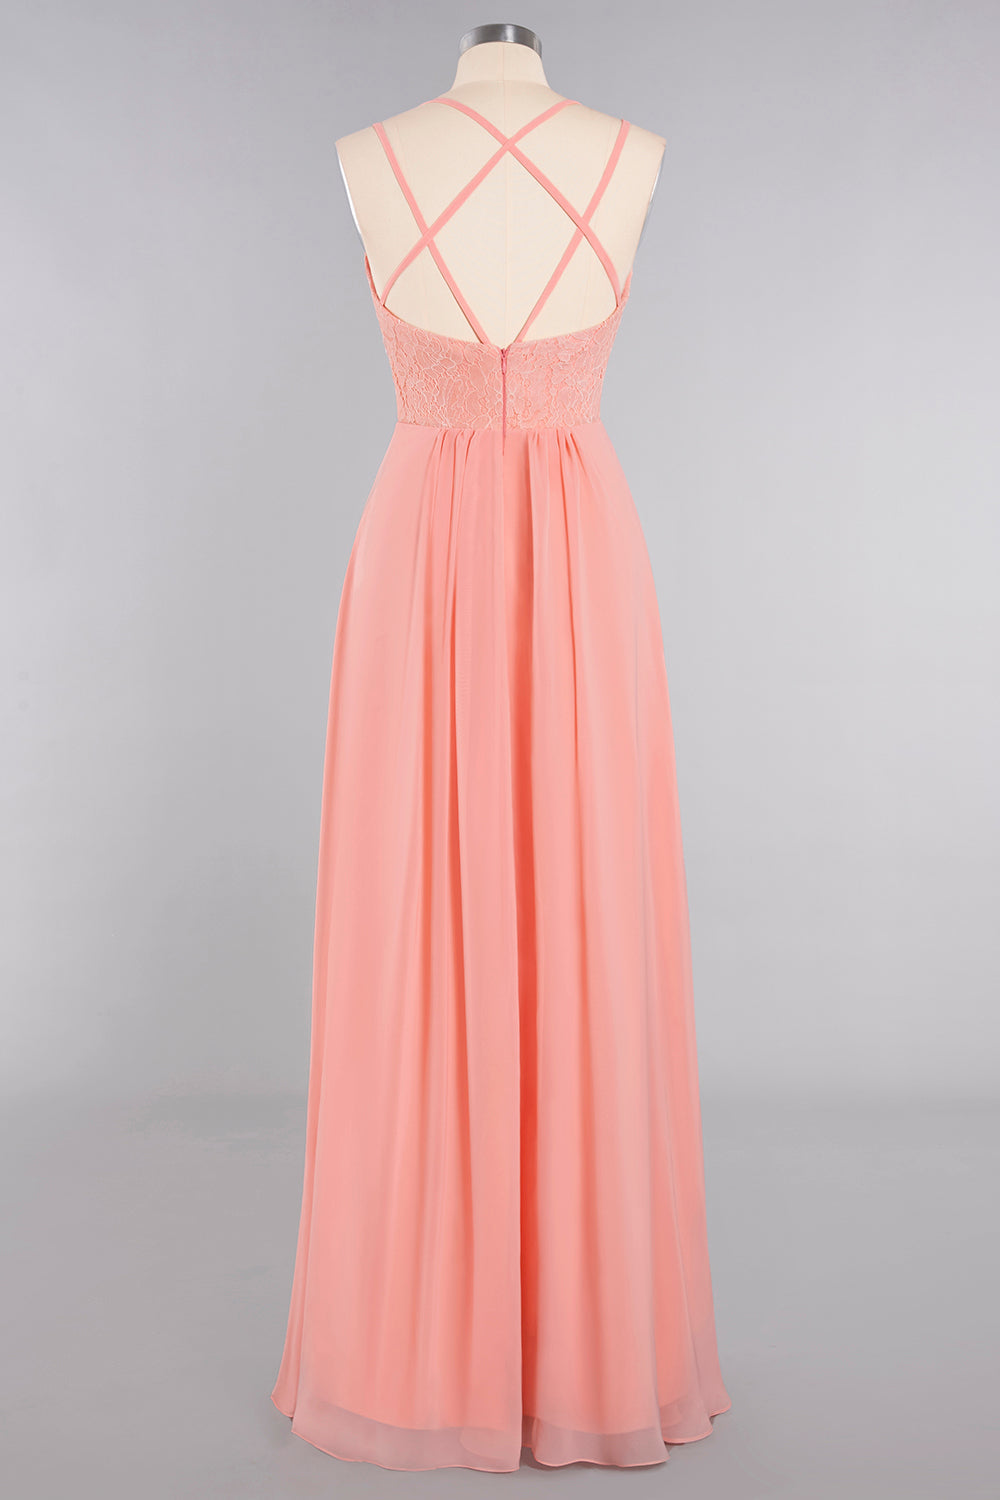 Sexy Spaghetti-Straps Coral Lace Bridesmaid Dresses with Slit-27dress